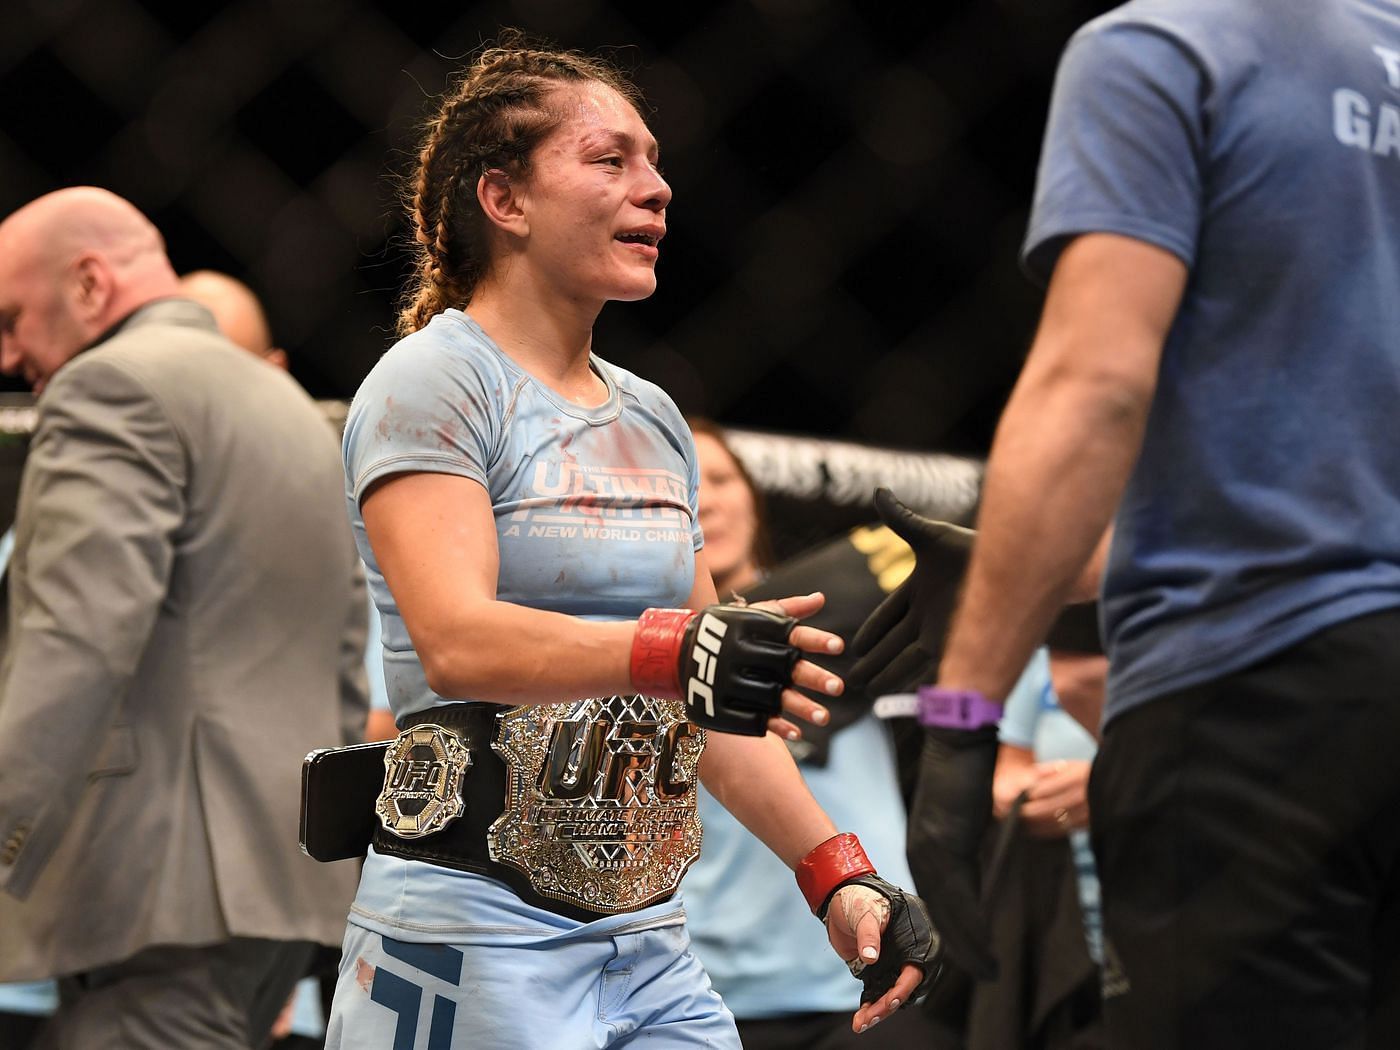 Weight cutting issues forced Nicco Montano to vacate her flyweight title in 2018